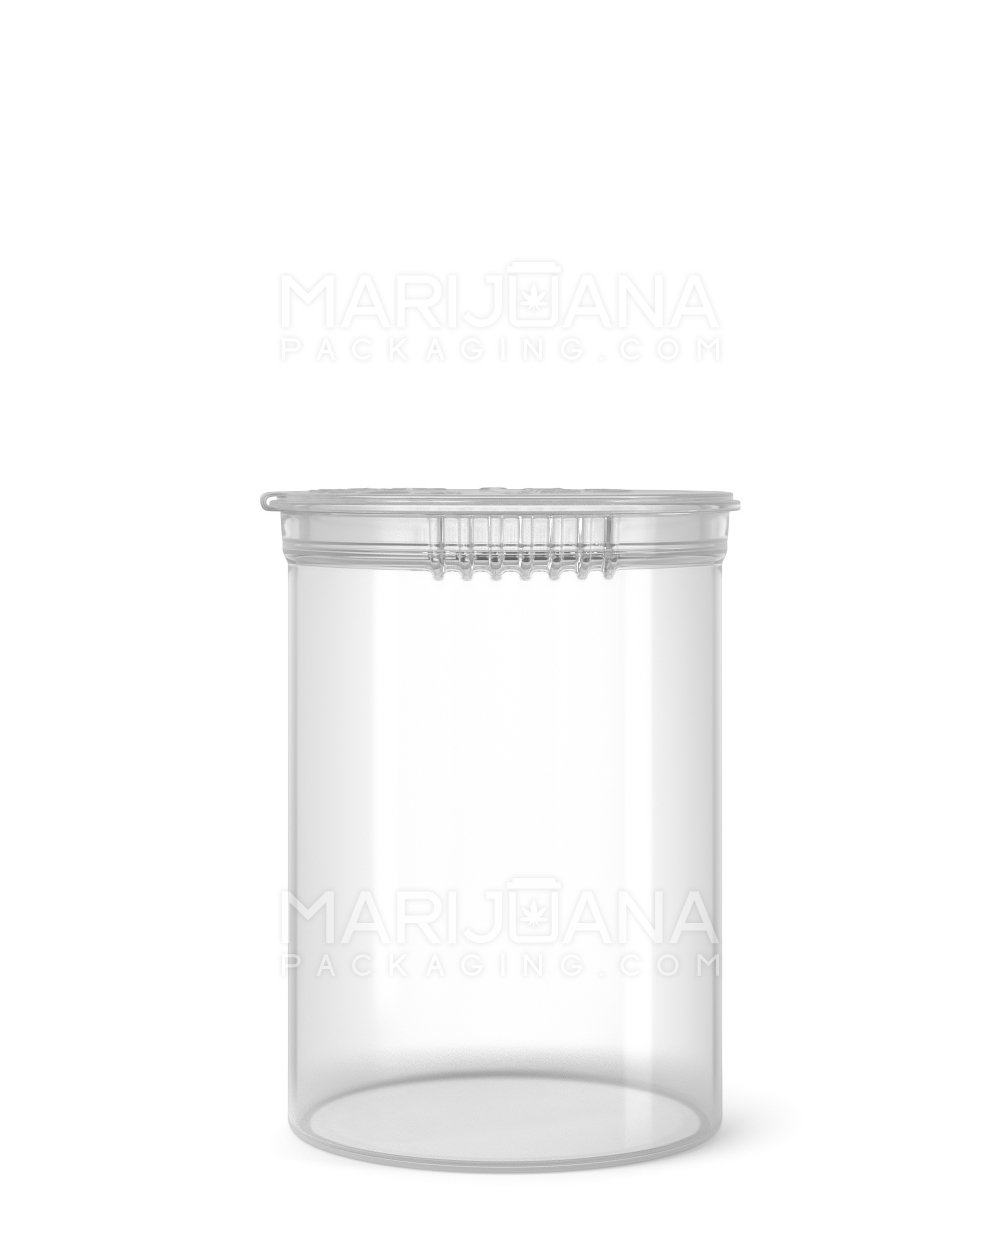 28g Concentrate Container, Clear, Child Resistant Glass Jar